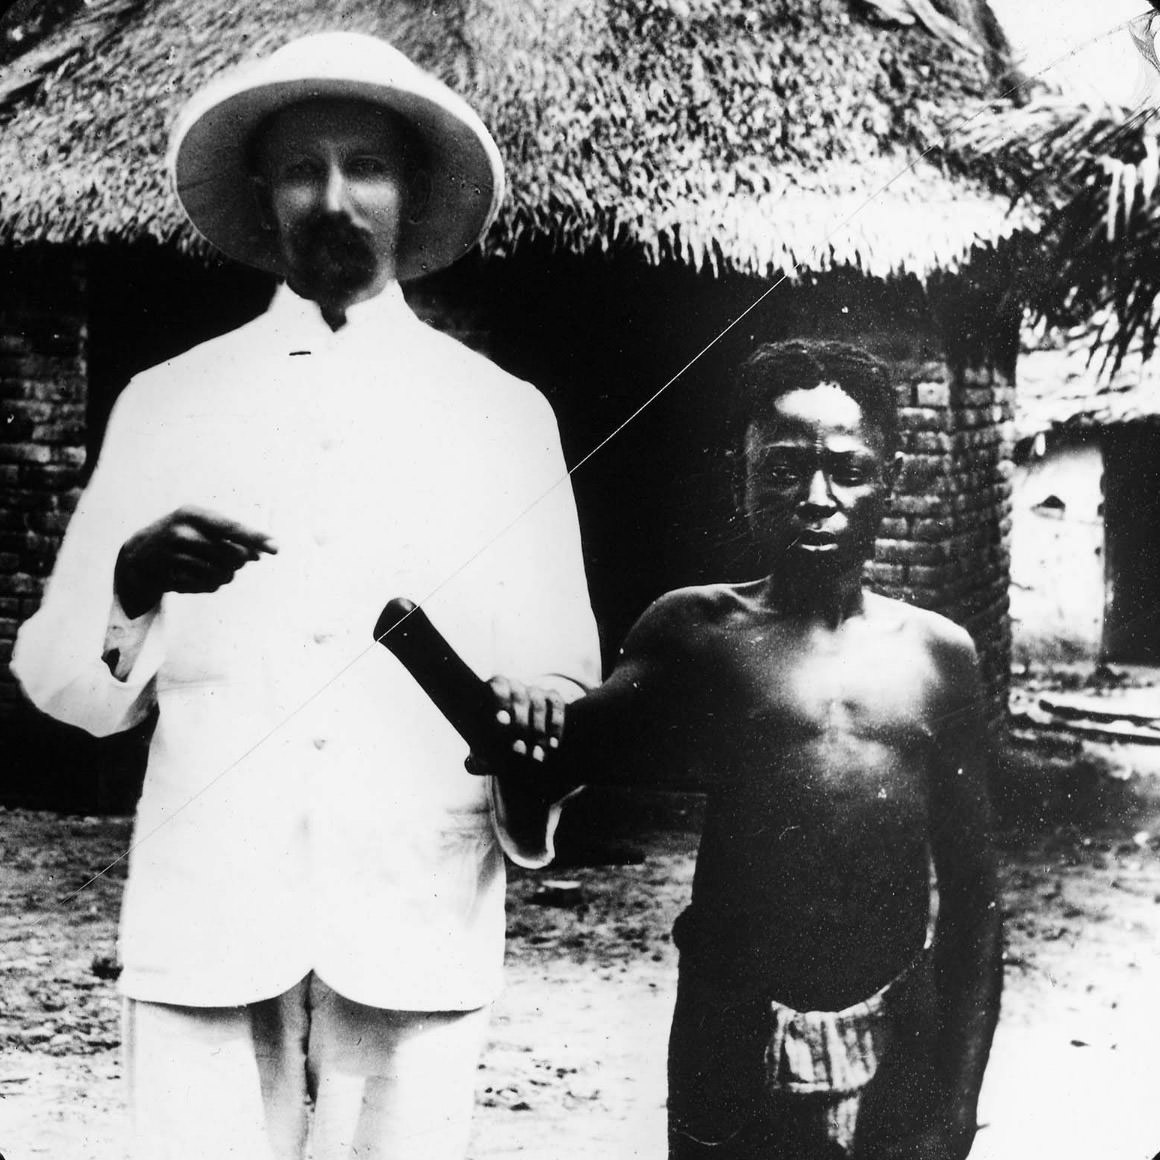 The Belgian Congo's Hacked Hands: A Brutal Reminder of Colonial Atrocities